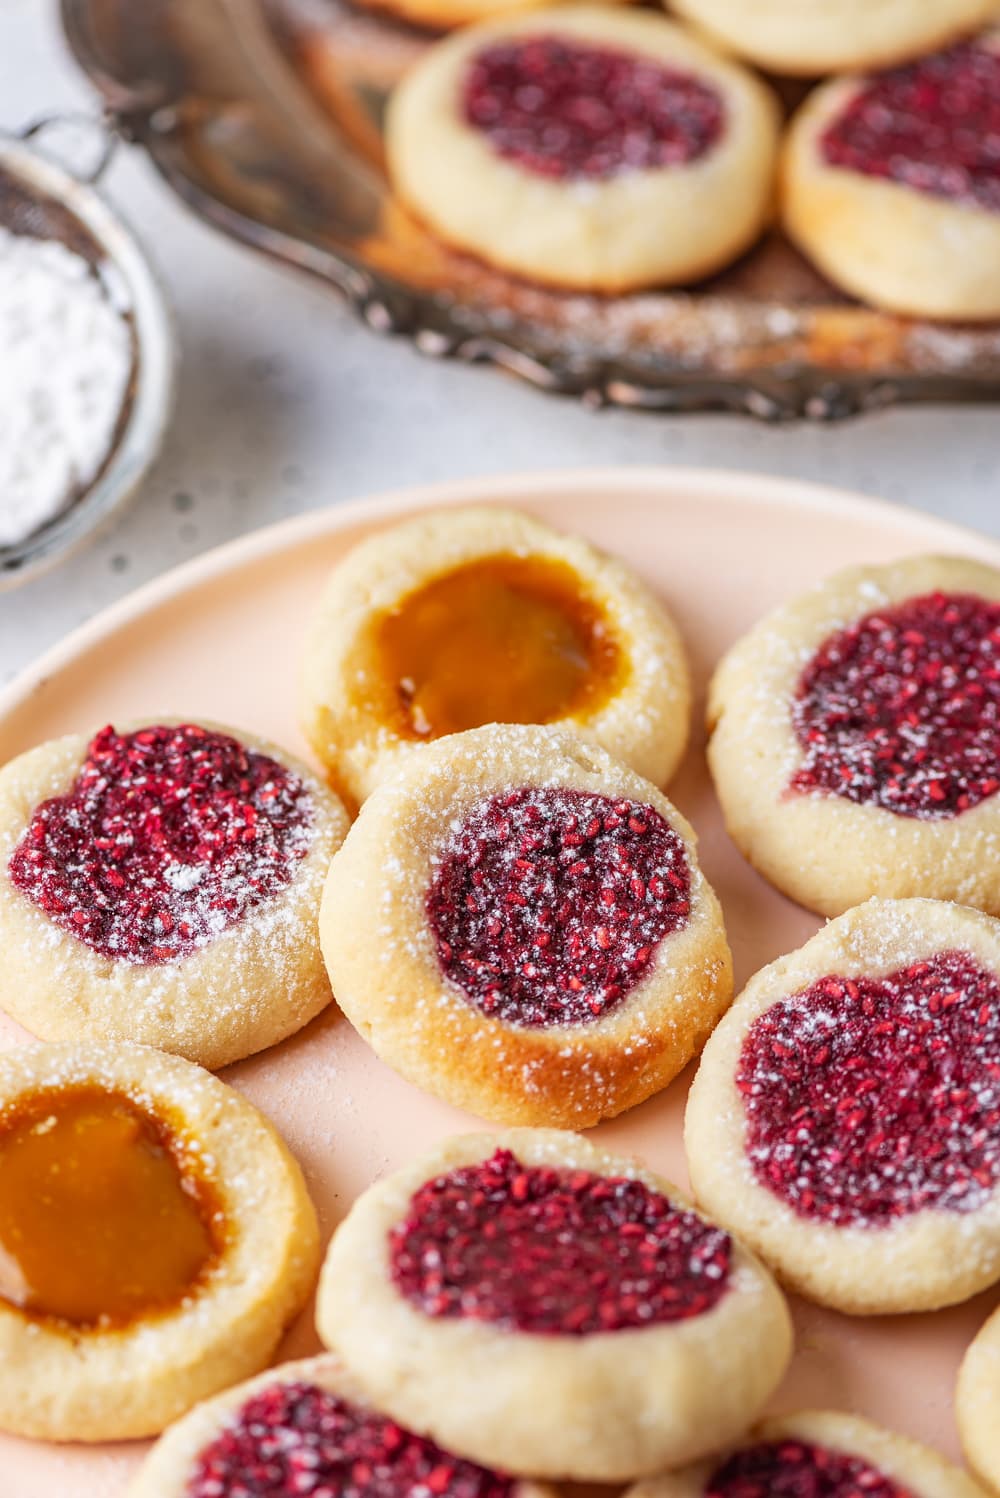 Thumbprint cookies on a nude plate. There are more cookies on a silver plate behind them.